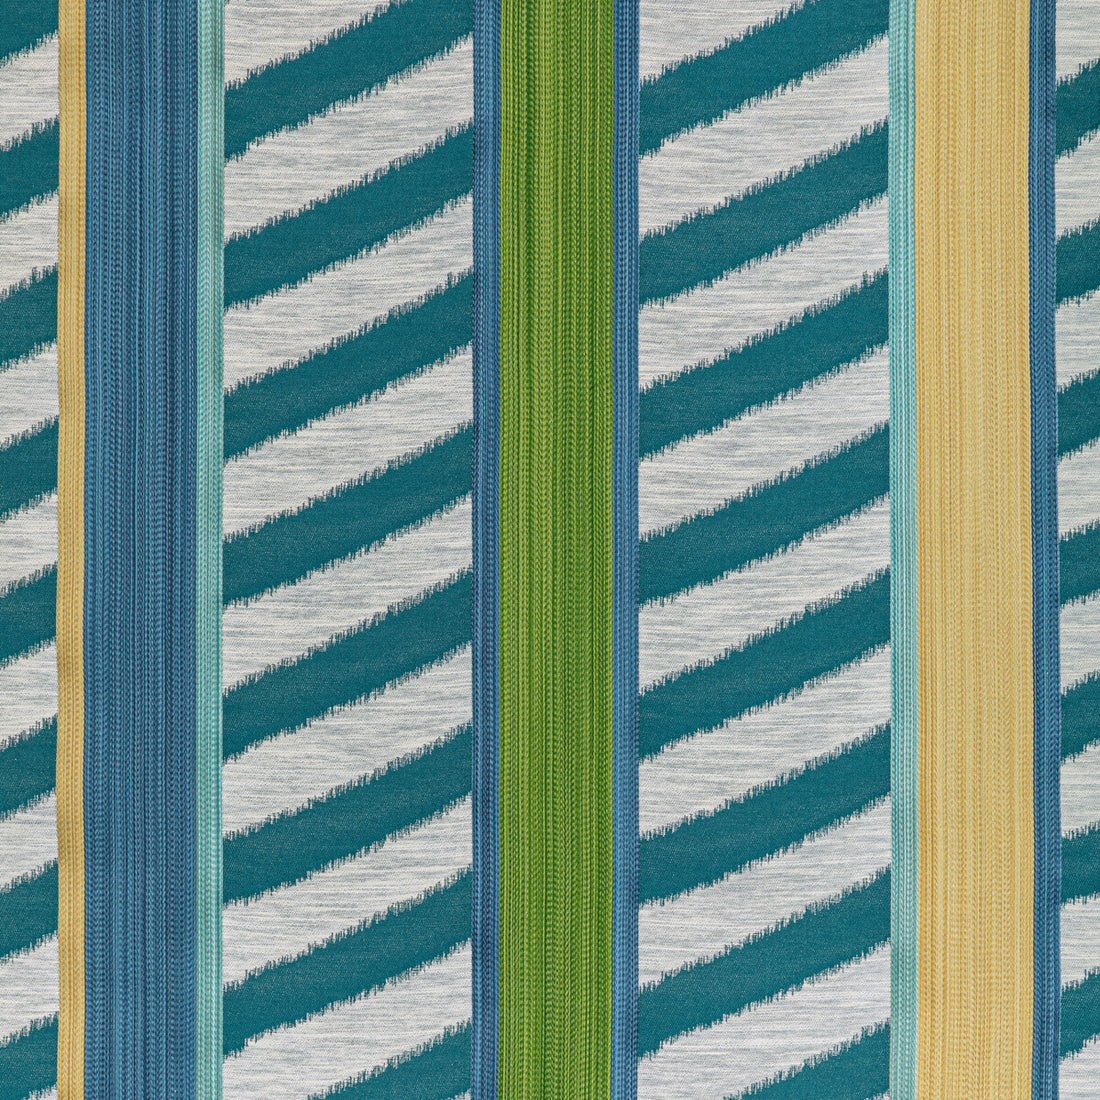 Mnemba Woven fabric in teal color - pattern 8022133.13.0 - by Brunschwig &amp; Fils in the Majorelle collection